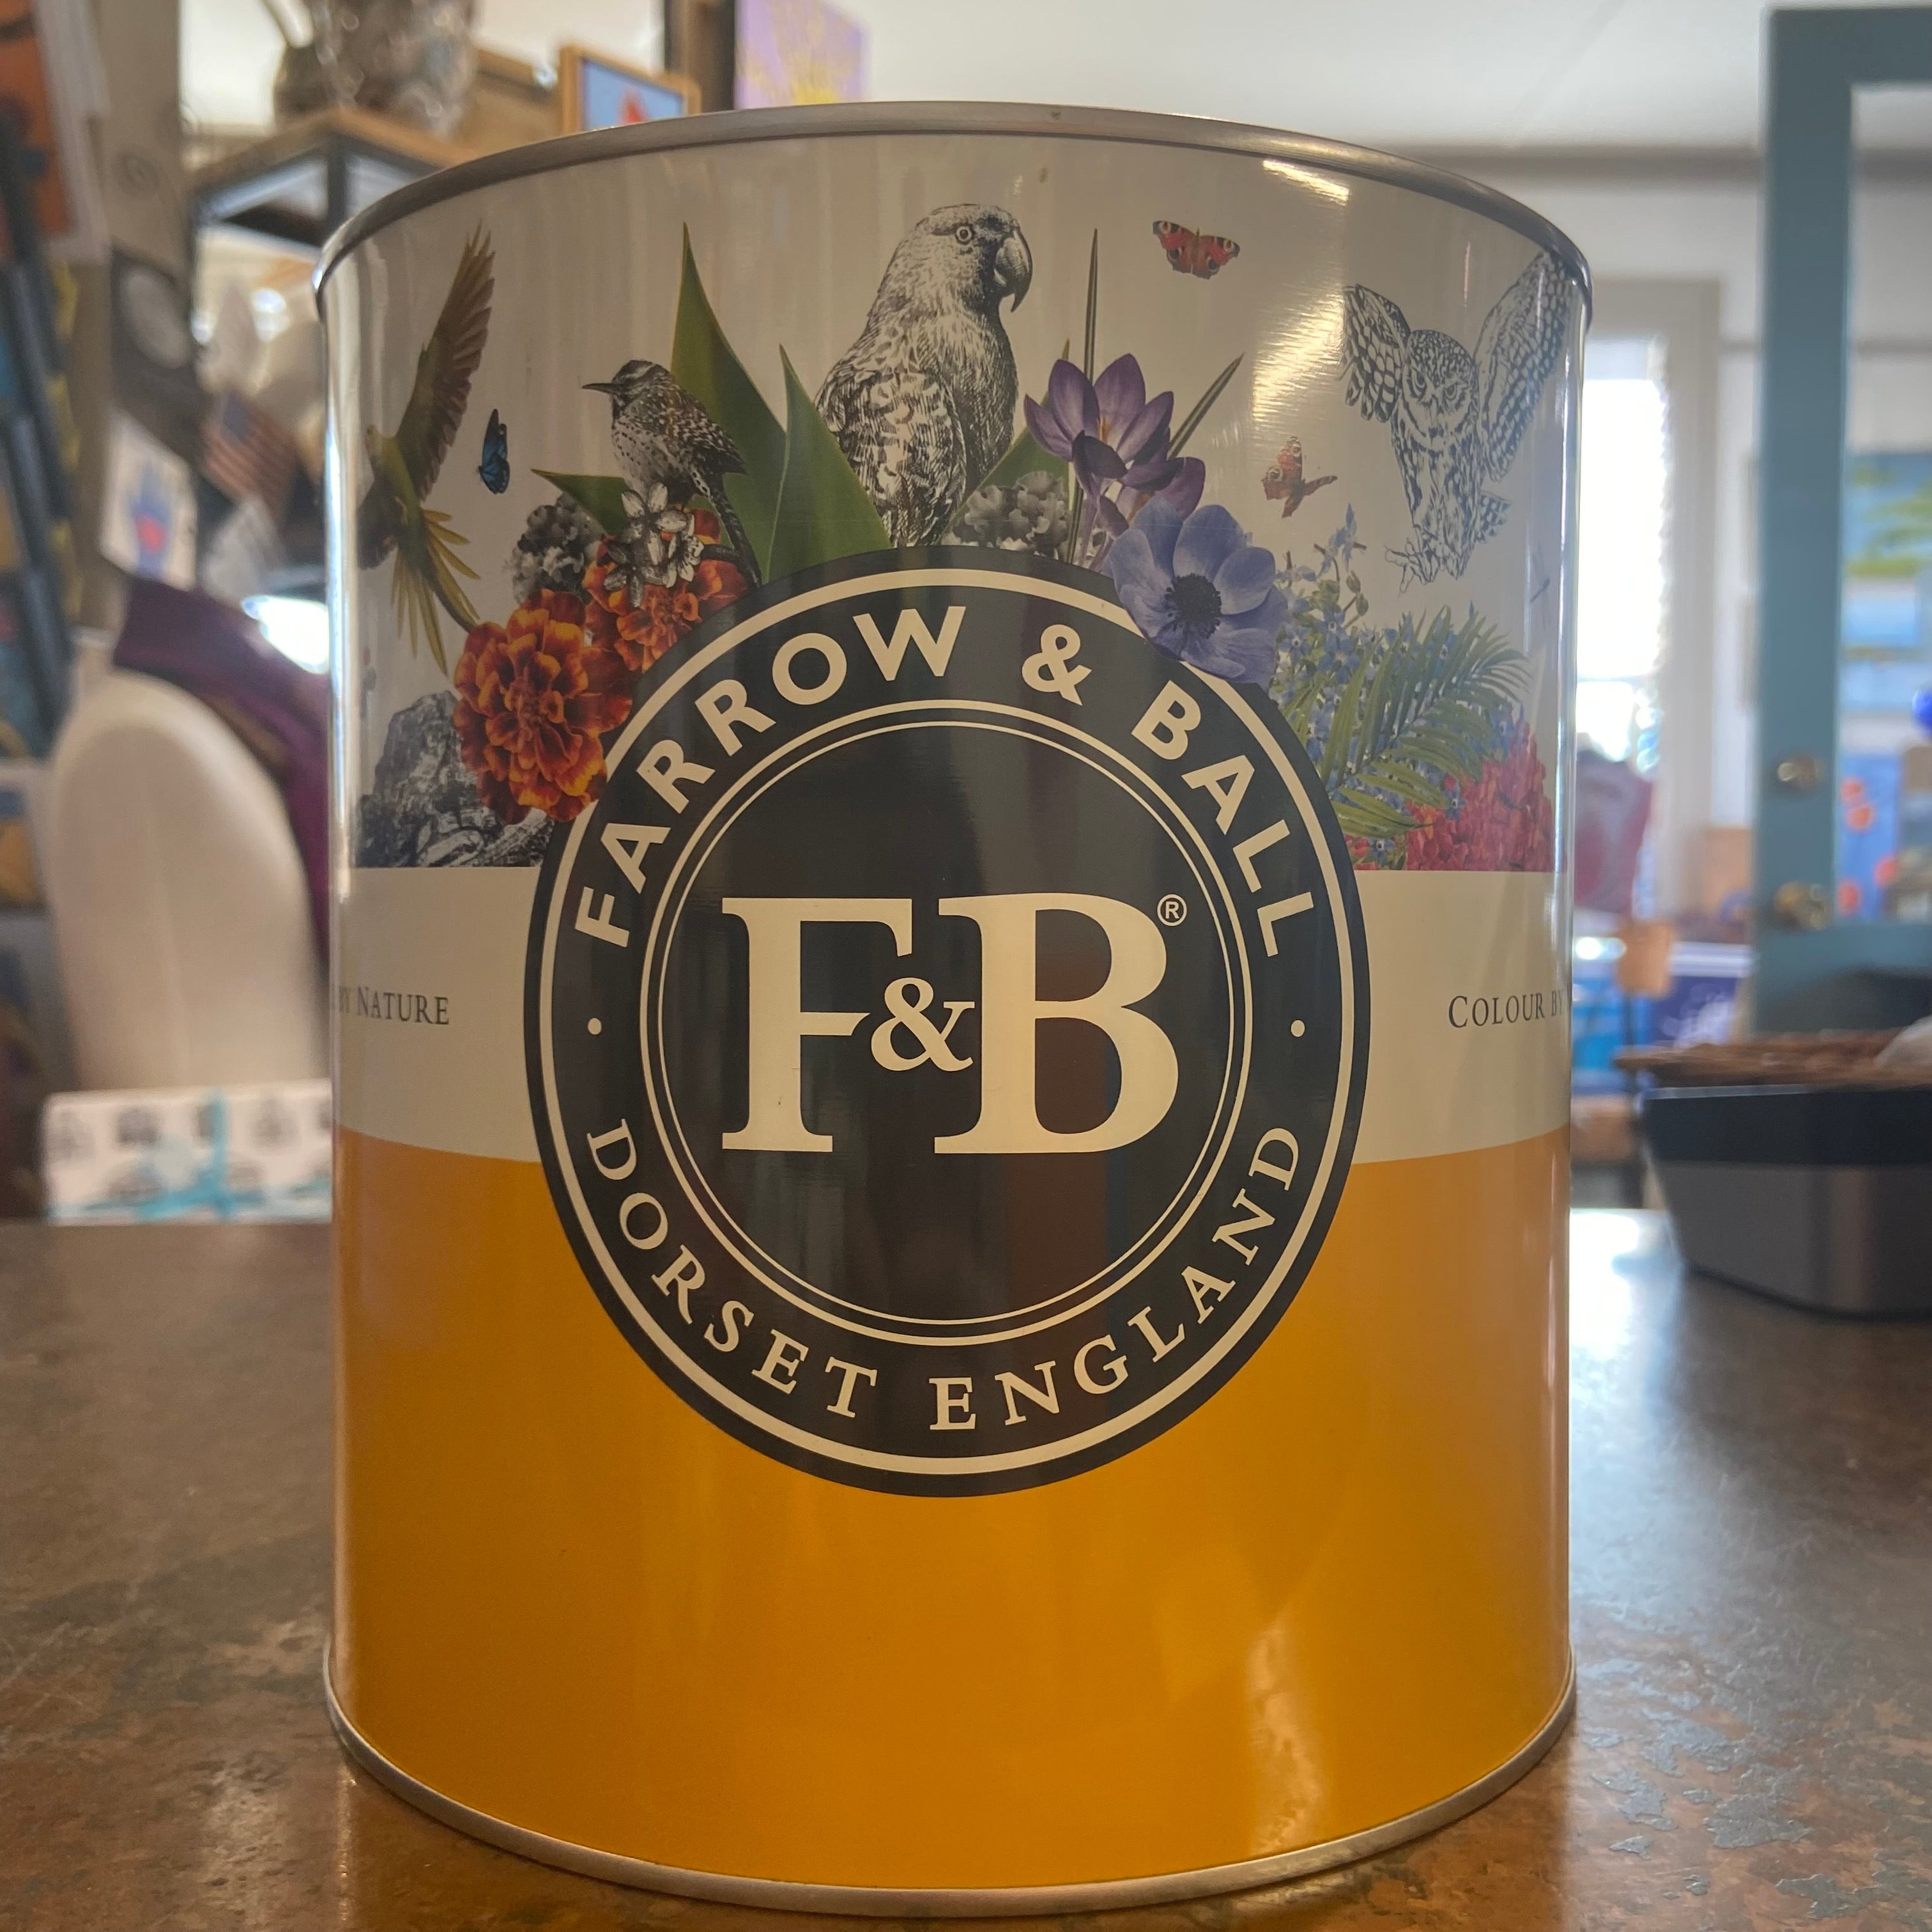 Empty Farrow and Ball Paint Cans